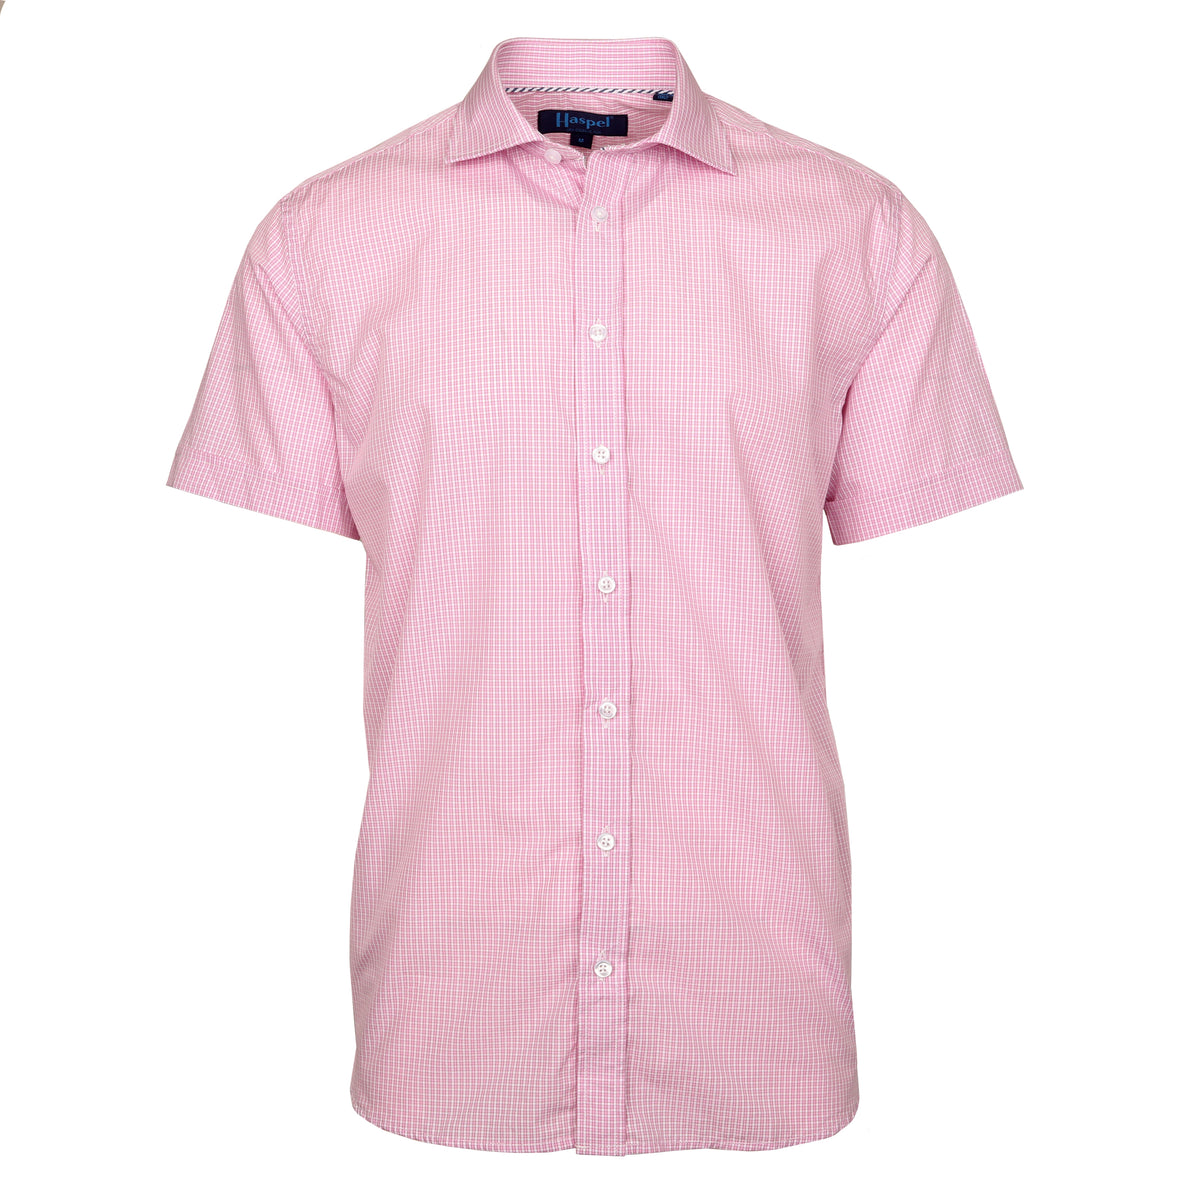 Look and smell as sweet as a rose. Lightweight cotton will keep you cool.  100% Cotton  •  Spread Collar  •  Short Sleeve  •  Chest Pocket  •  Machine Washable  •  Made in Italy